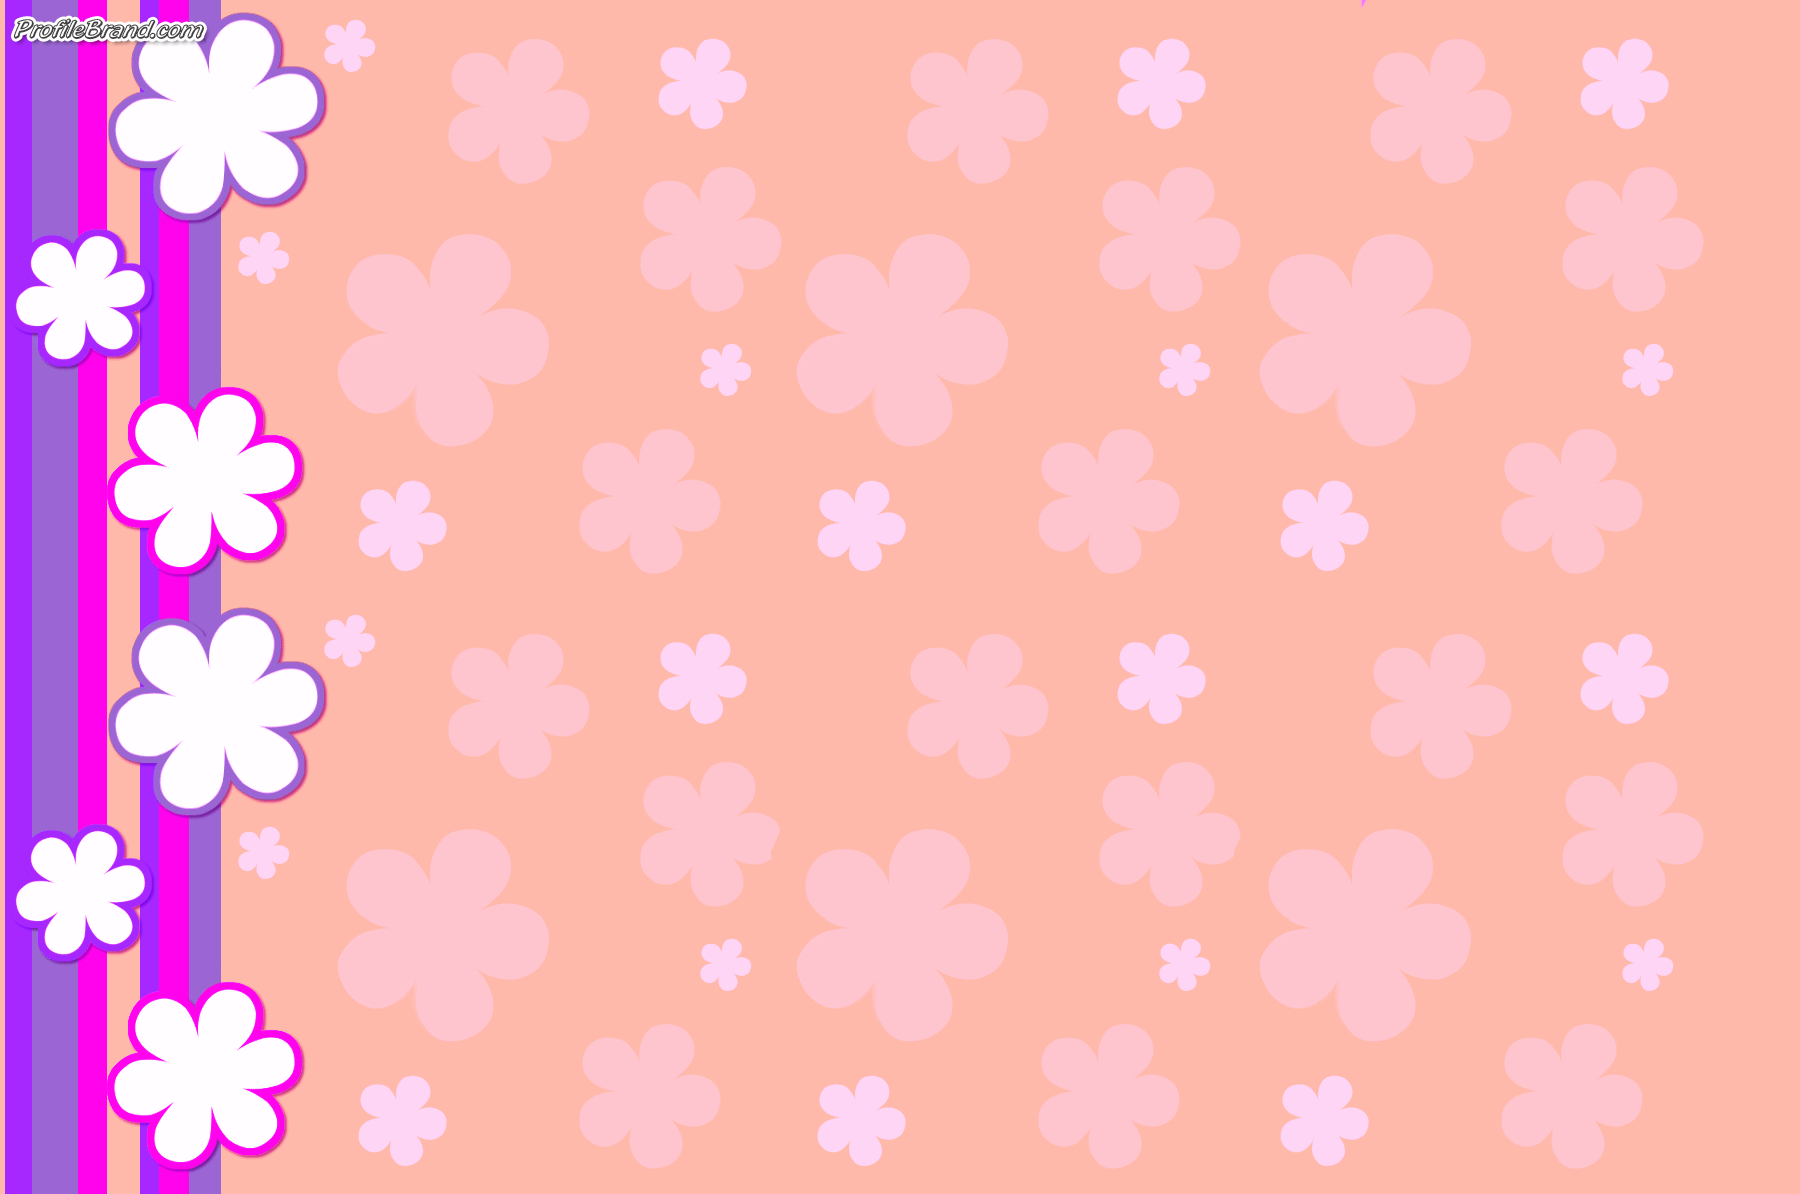 Purple and Pink Cute Design